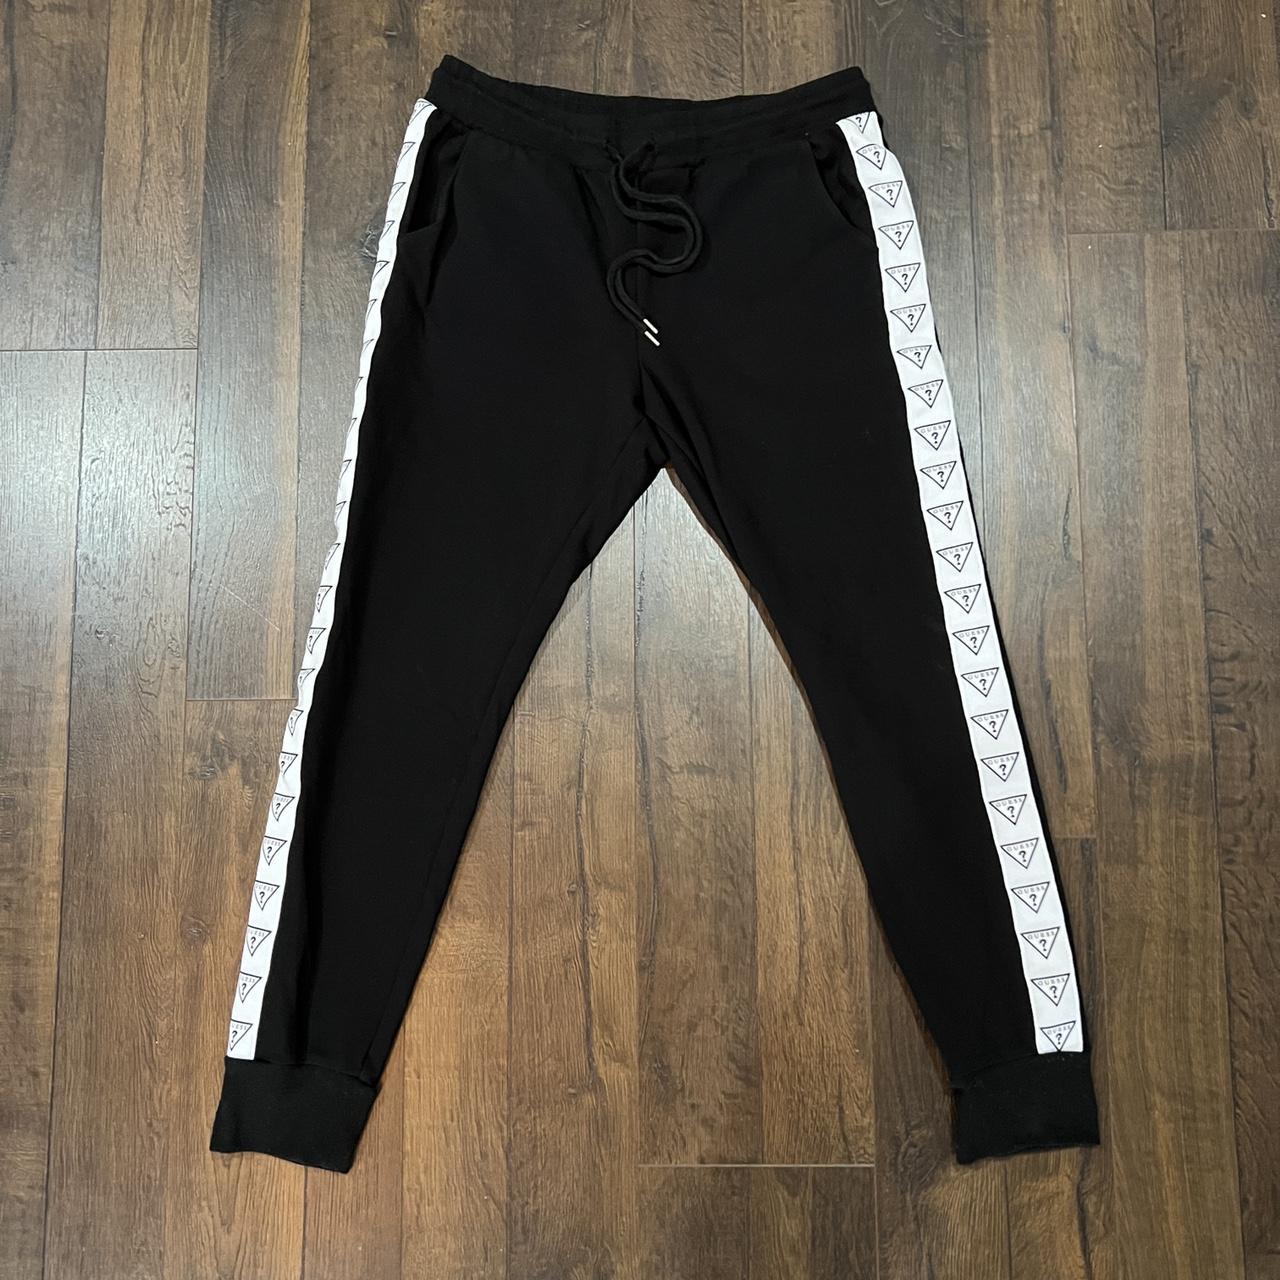 Guess Men's Black and White Joggers-tracksuits | Depop